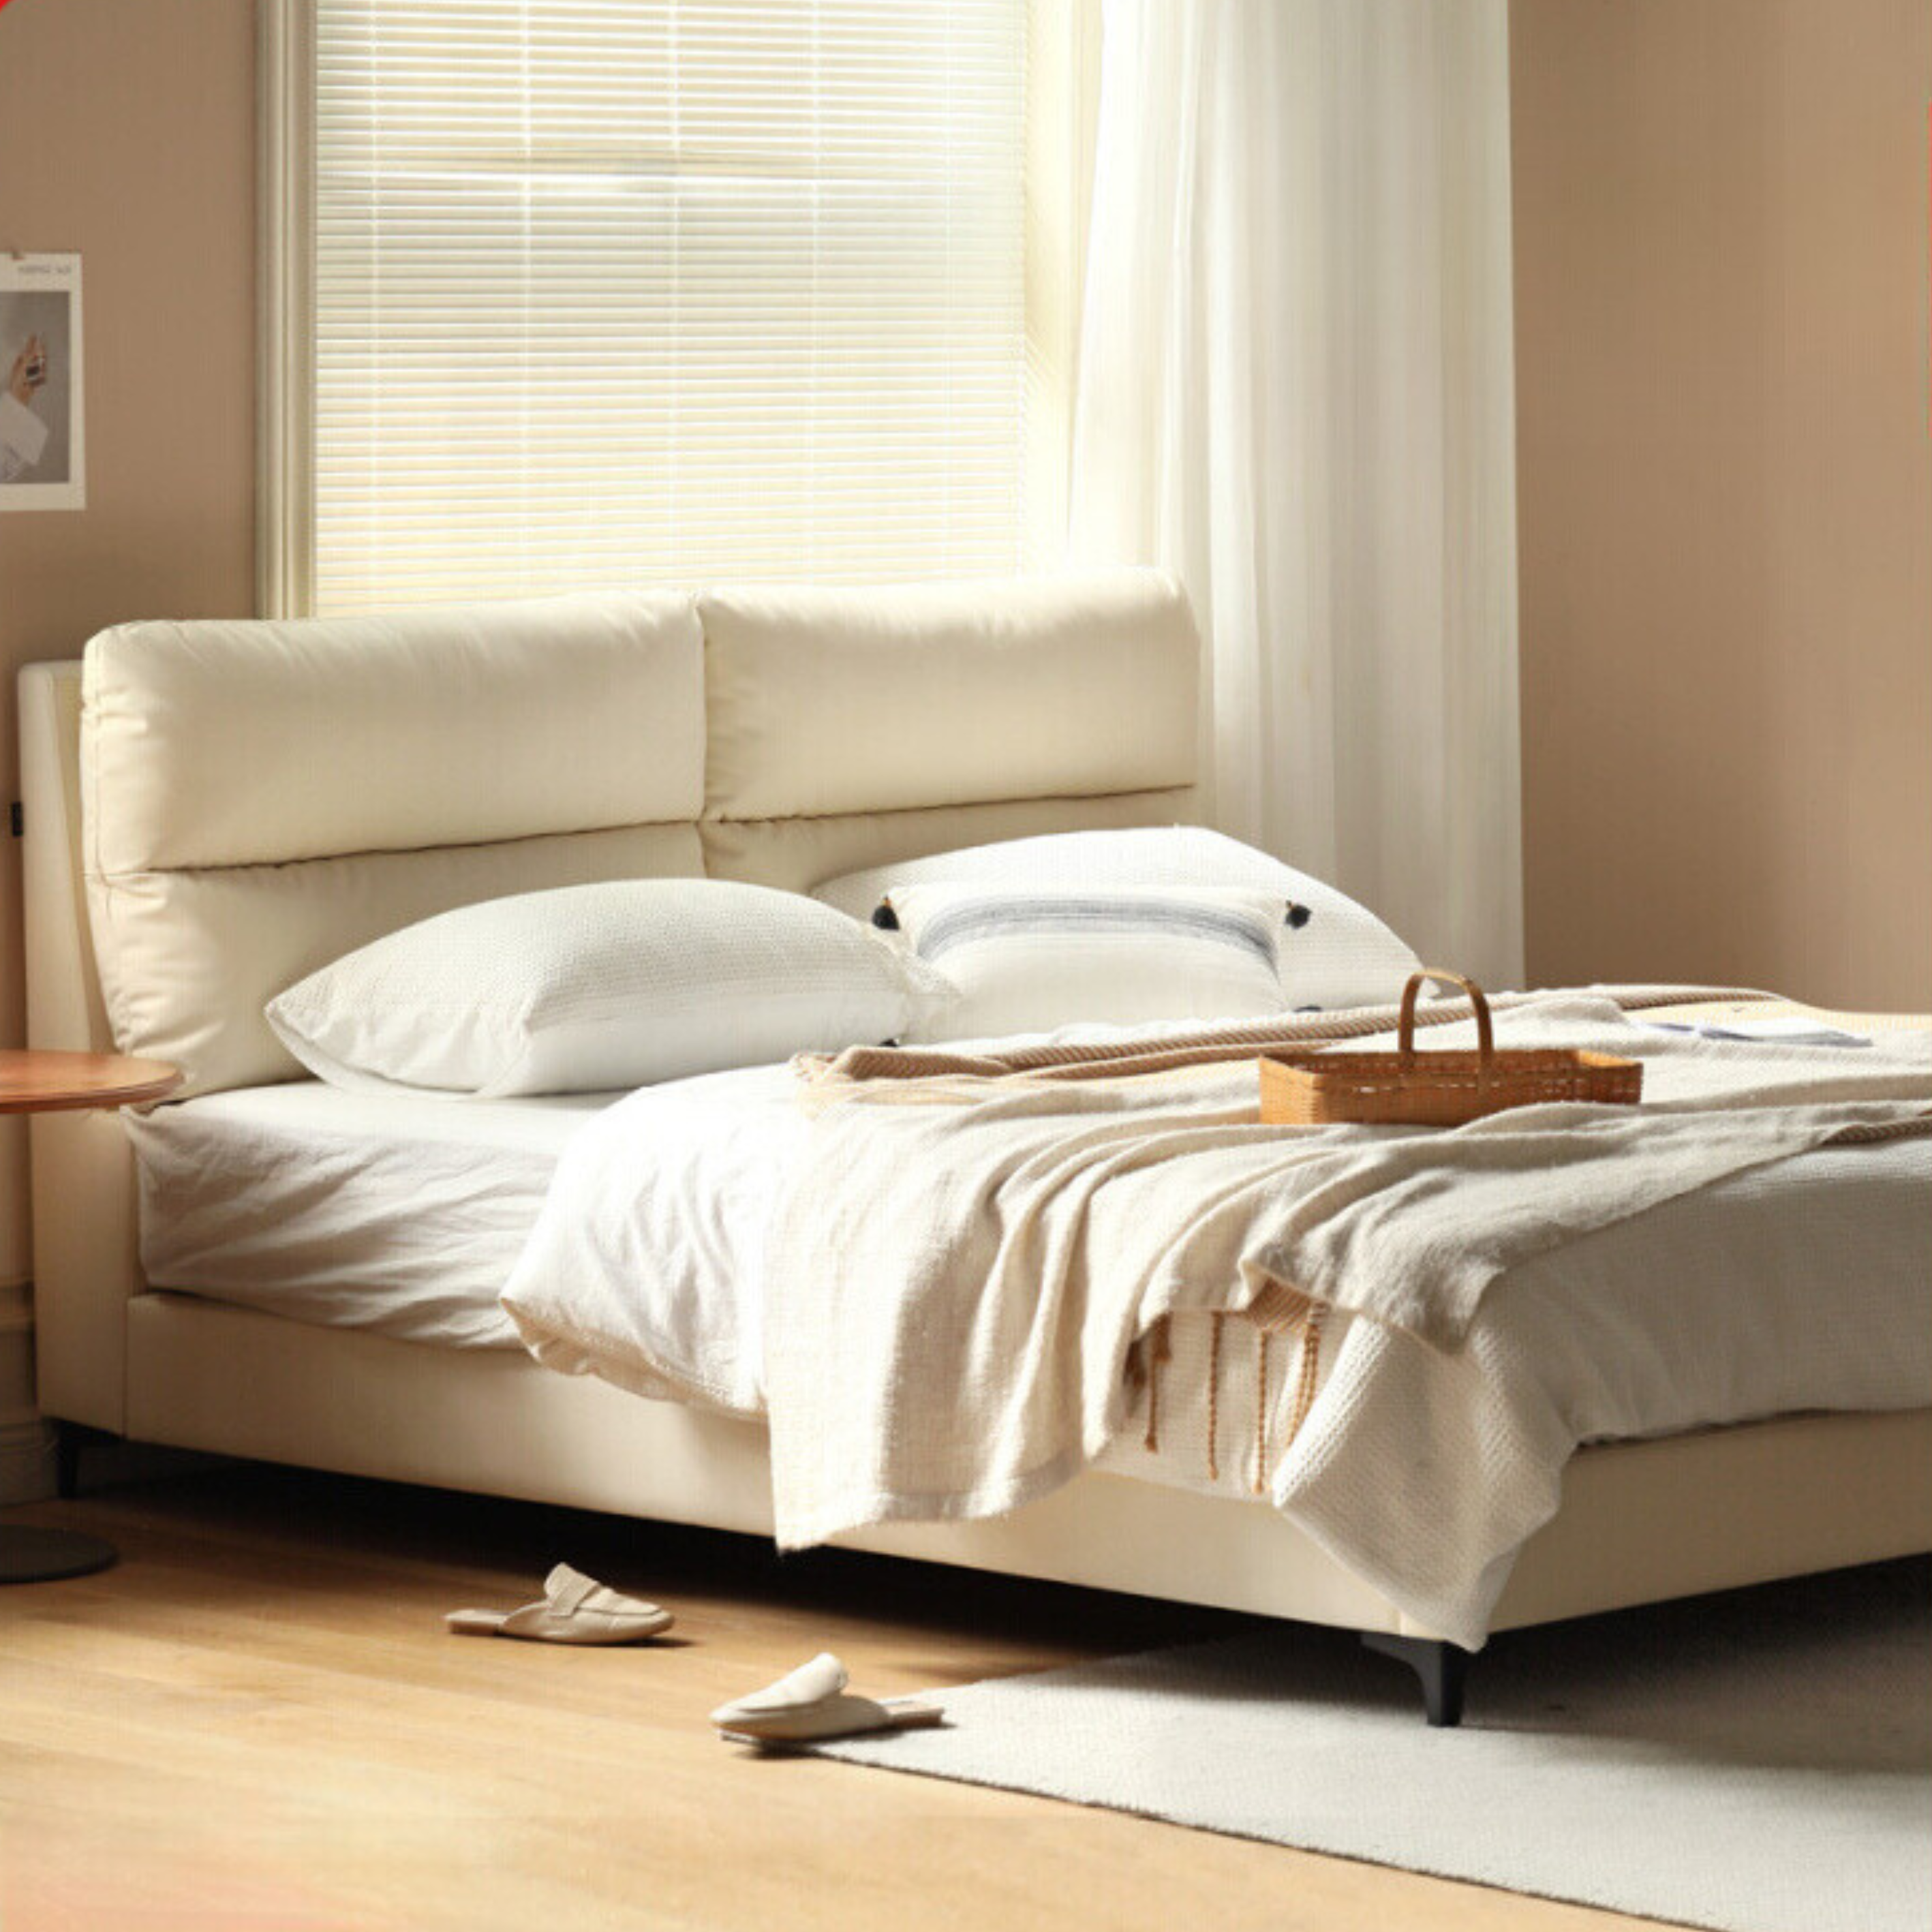 Organic leather, Fabric Modern bed, Atmospheric box Bed"